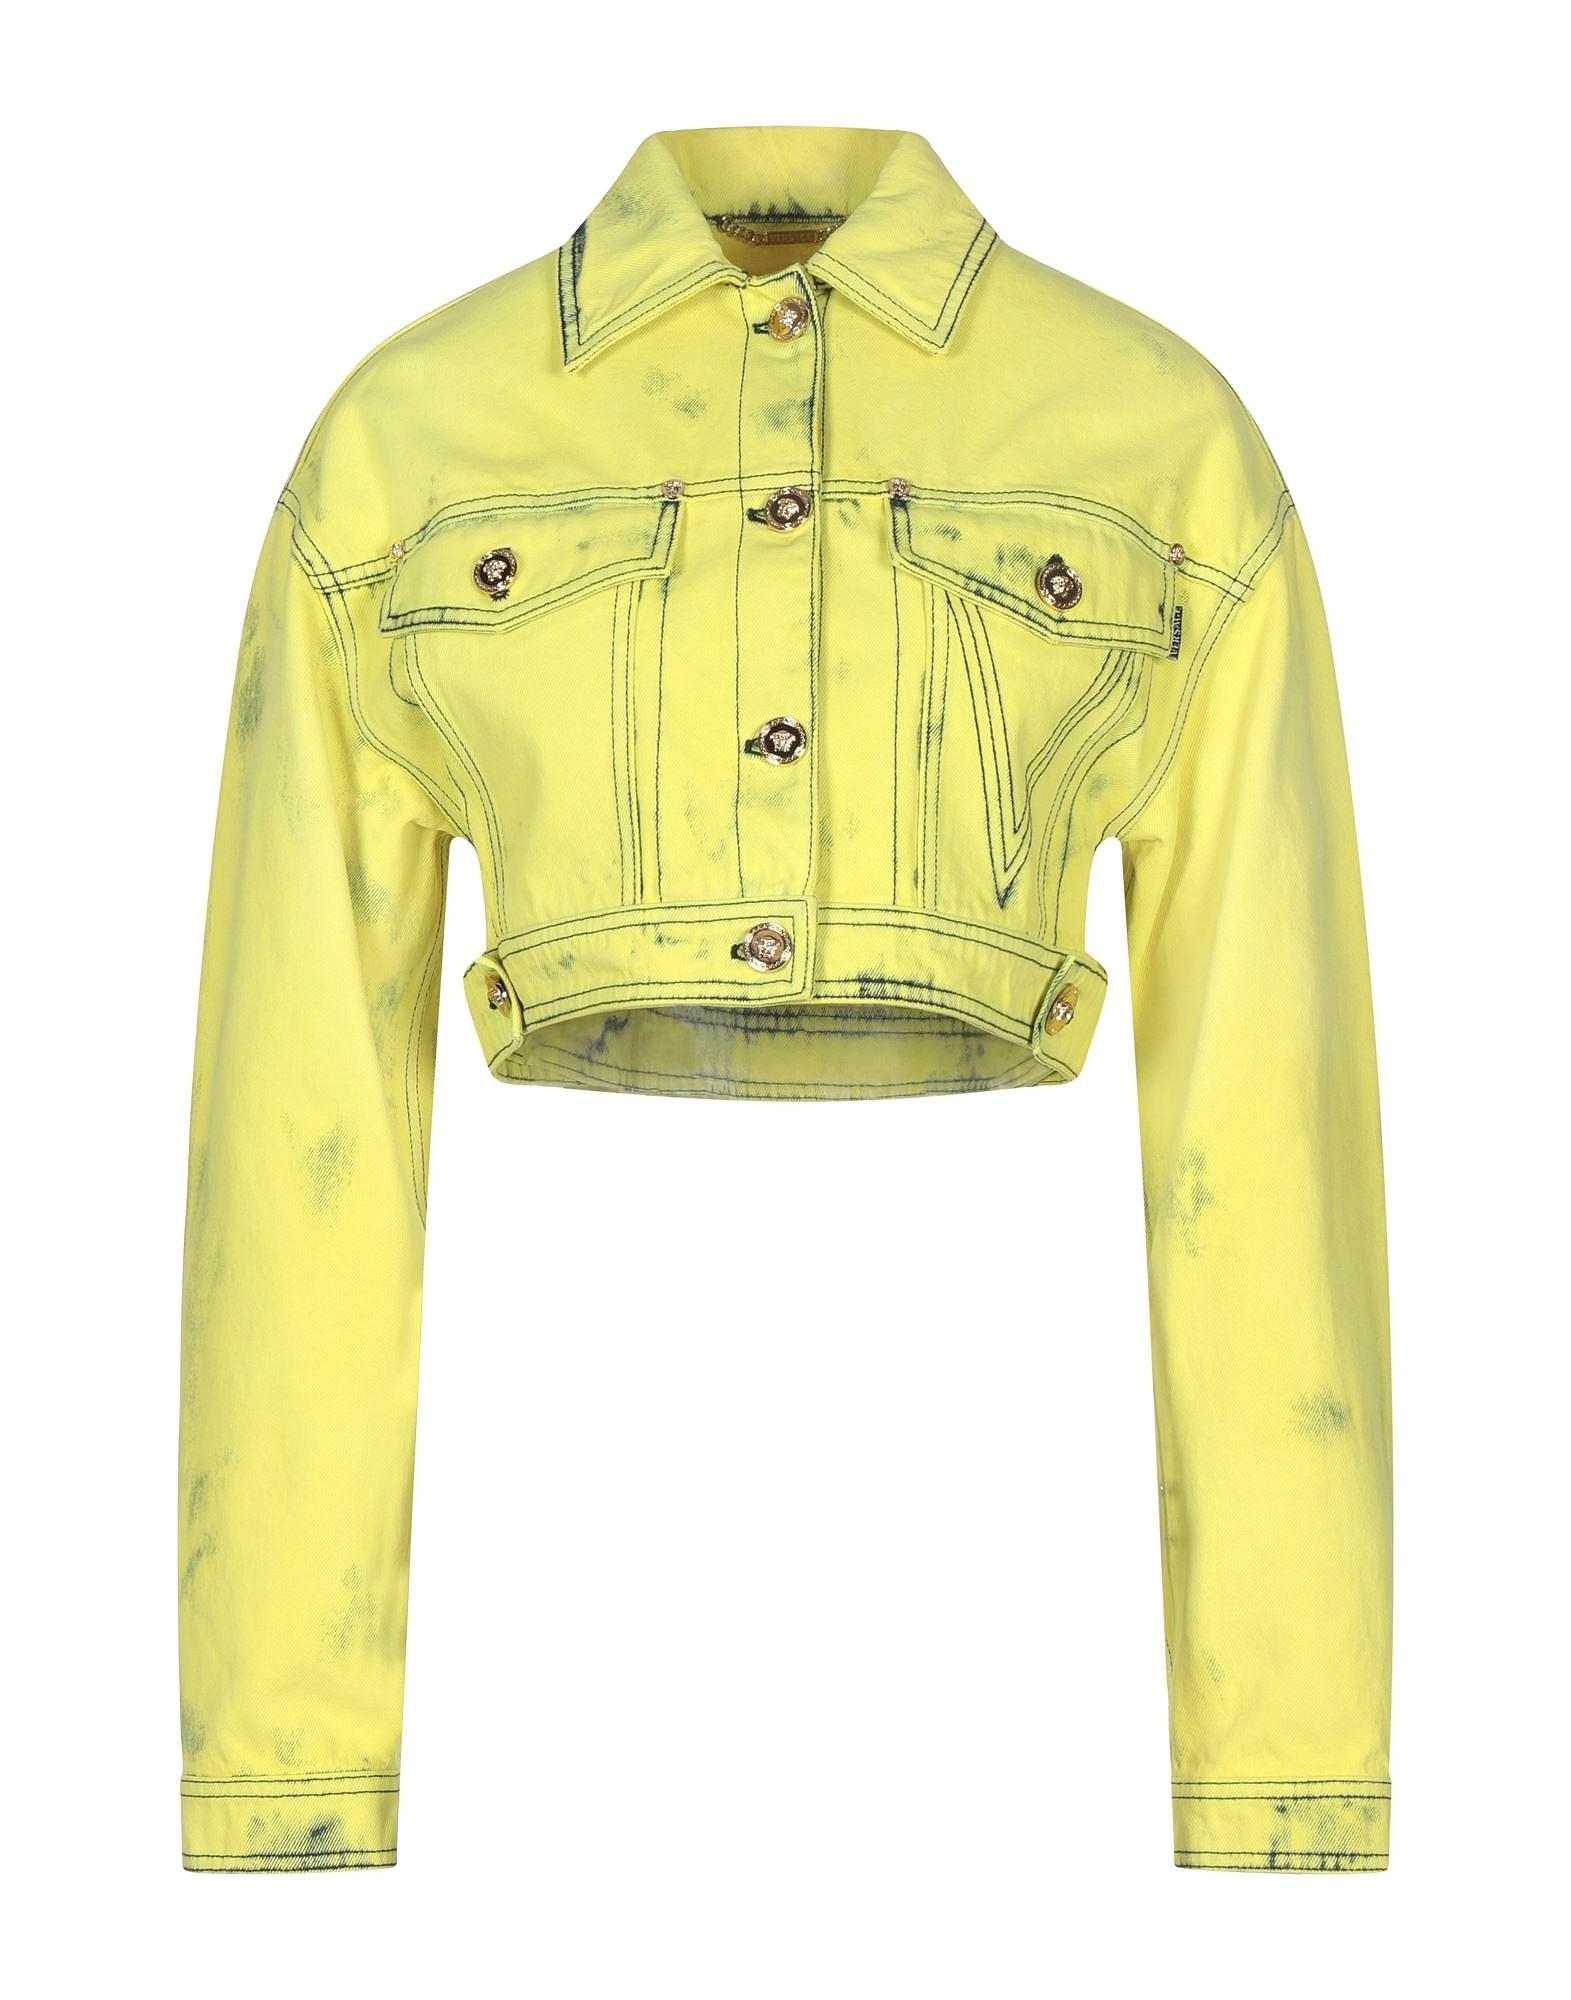 Versace Yellow Acid Wash Denim Cropped Jean Jacket with Logo Label

This yellow Versace cropped boxy denim jacket features a spread collar, a front button fastening, long sleeves with buttoned cuffs, two flap pockets, green topstitching, a